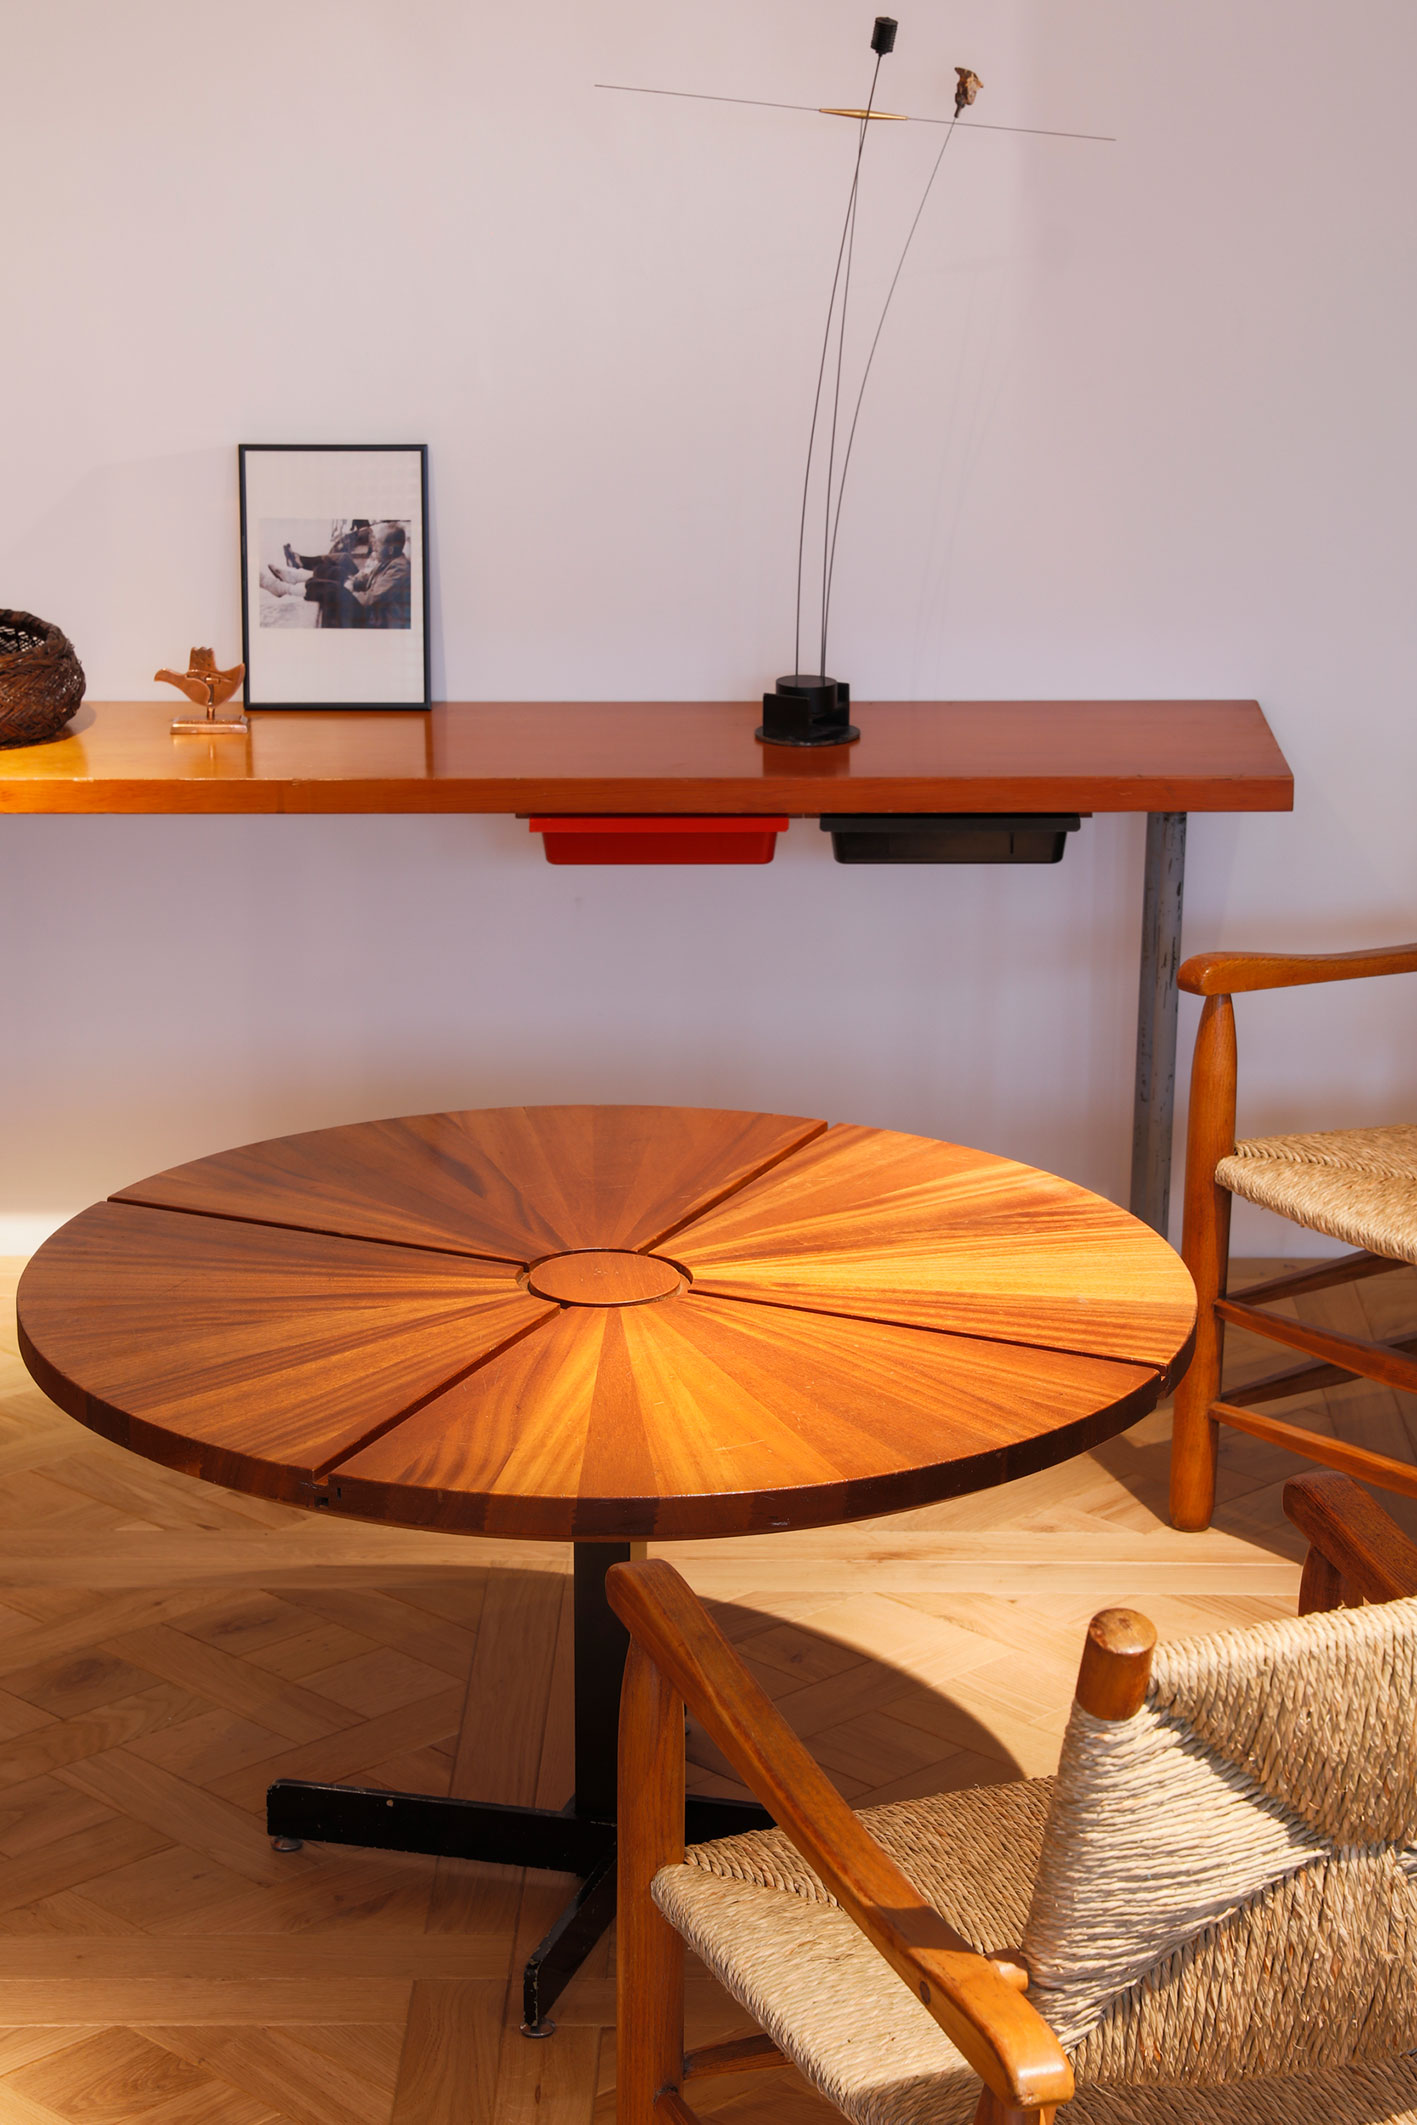 Charlotte Perriand's life in design: “She refused to confine women to a  closed kitchen” - Design Week